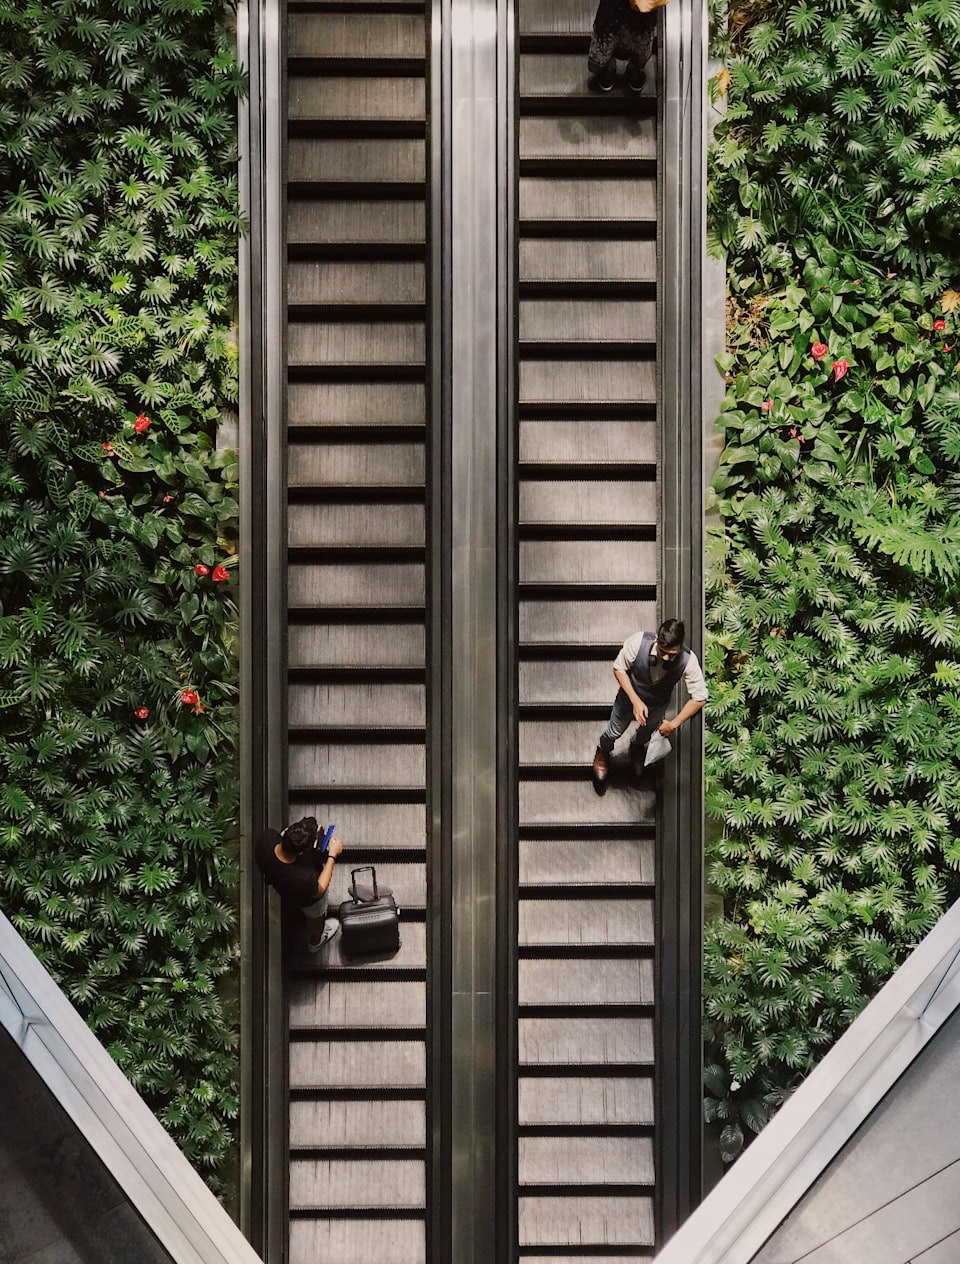 Escalators with greenery either side.